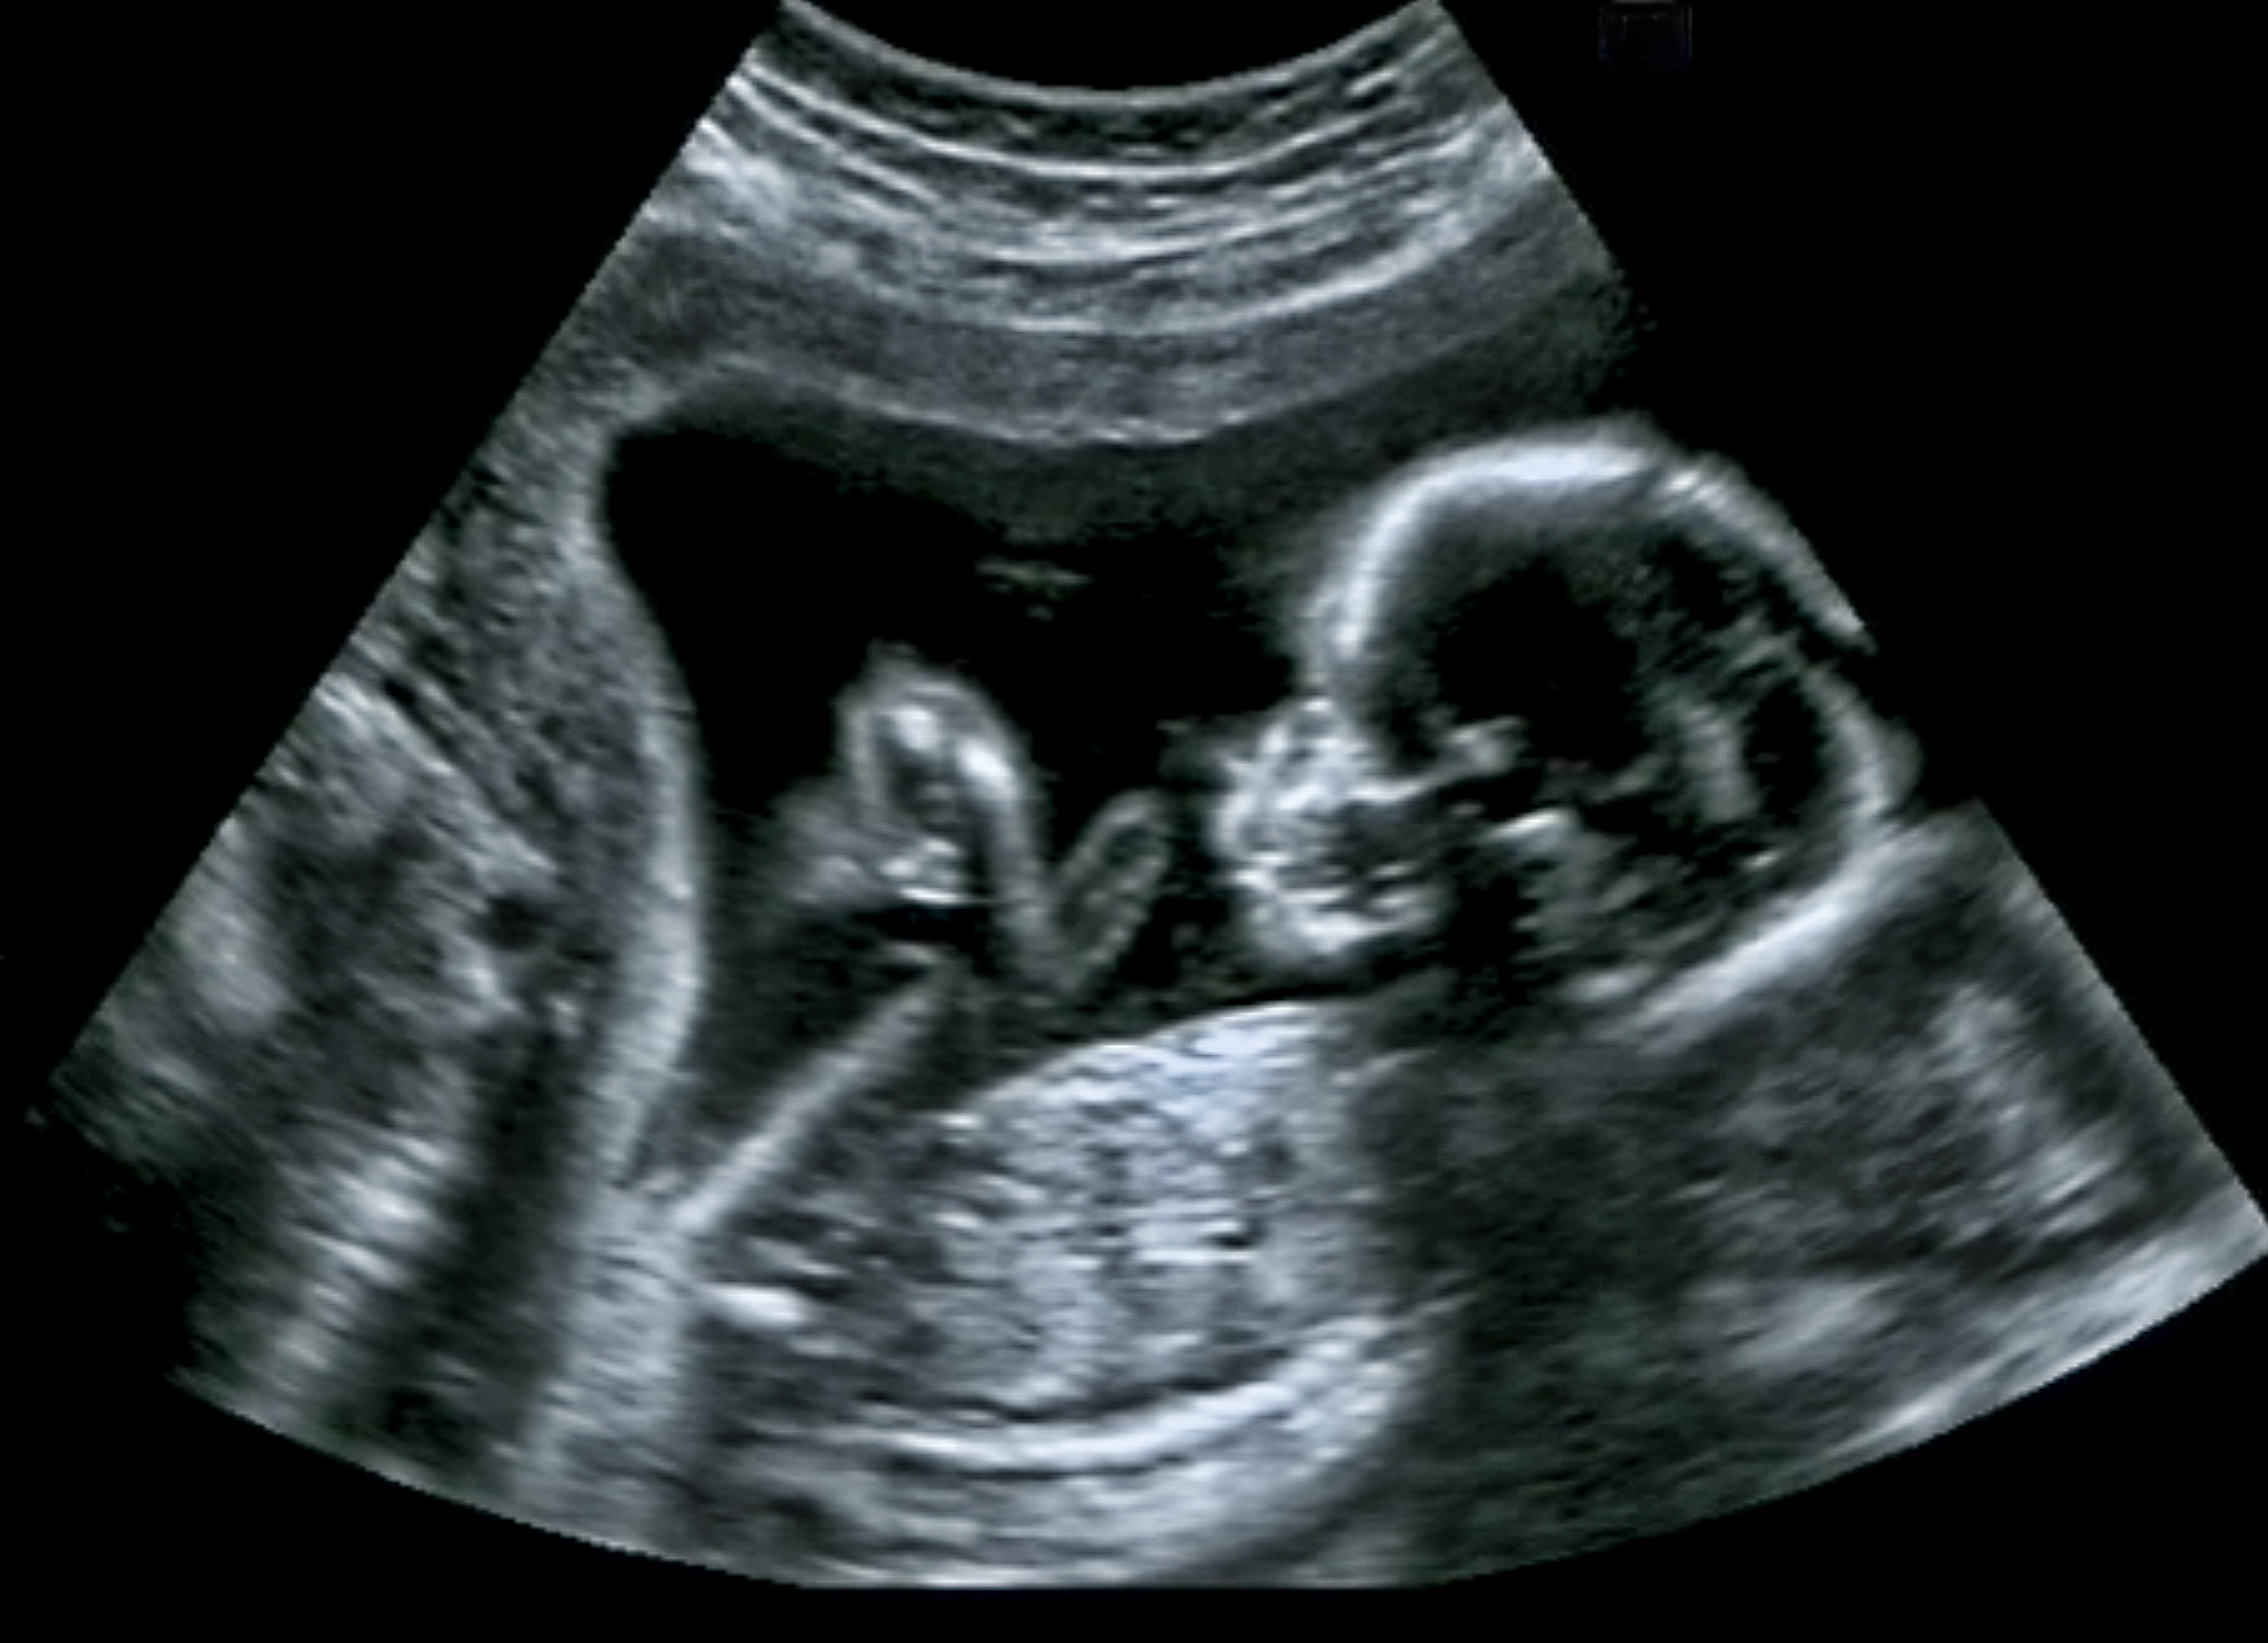 Pictured is an ultrasound of a fetus. SHUTTERSTOCK/ GagliardiImages